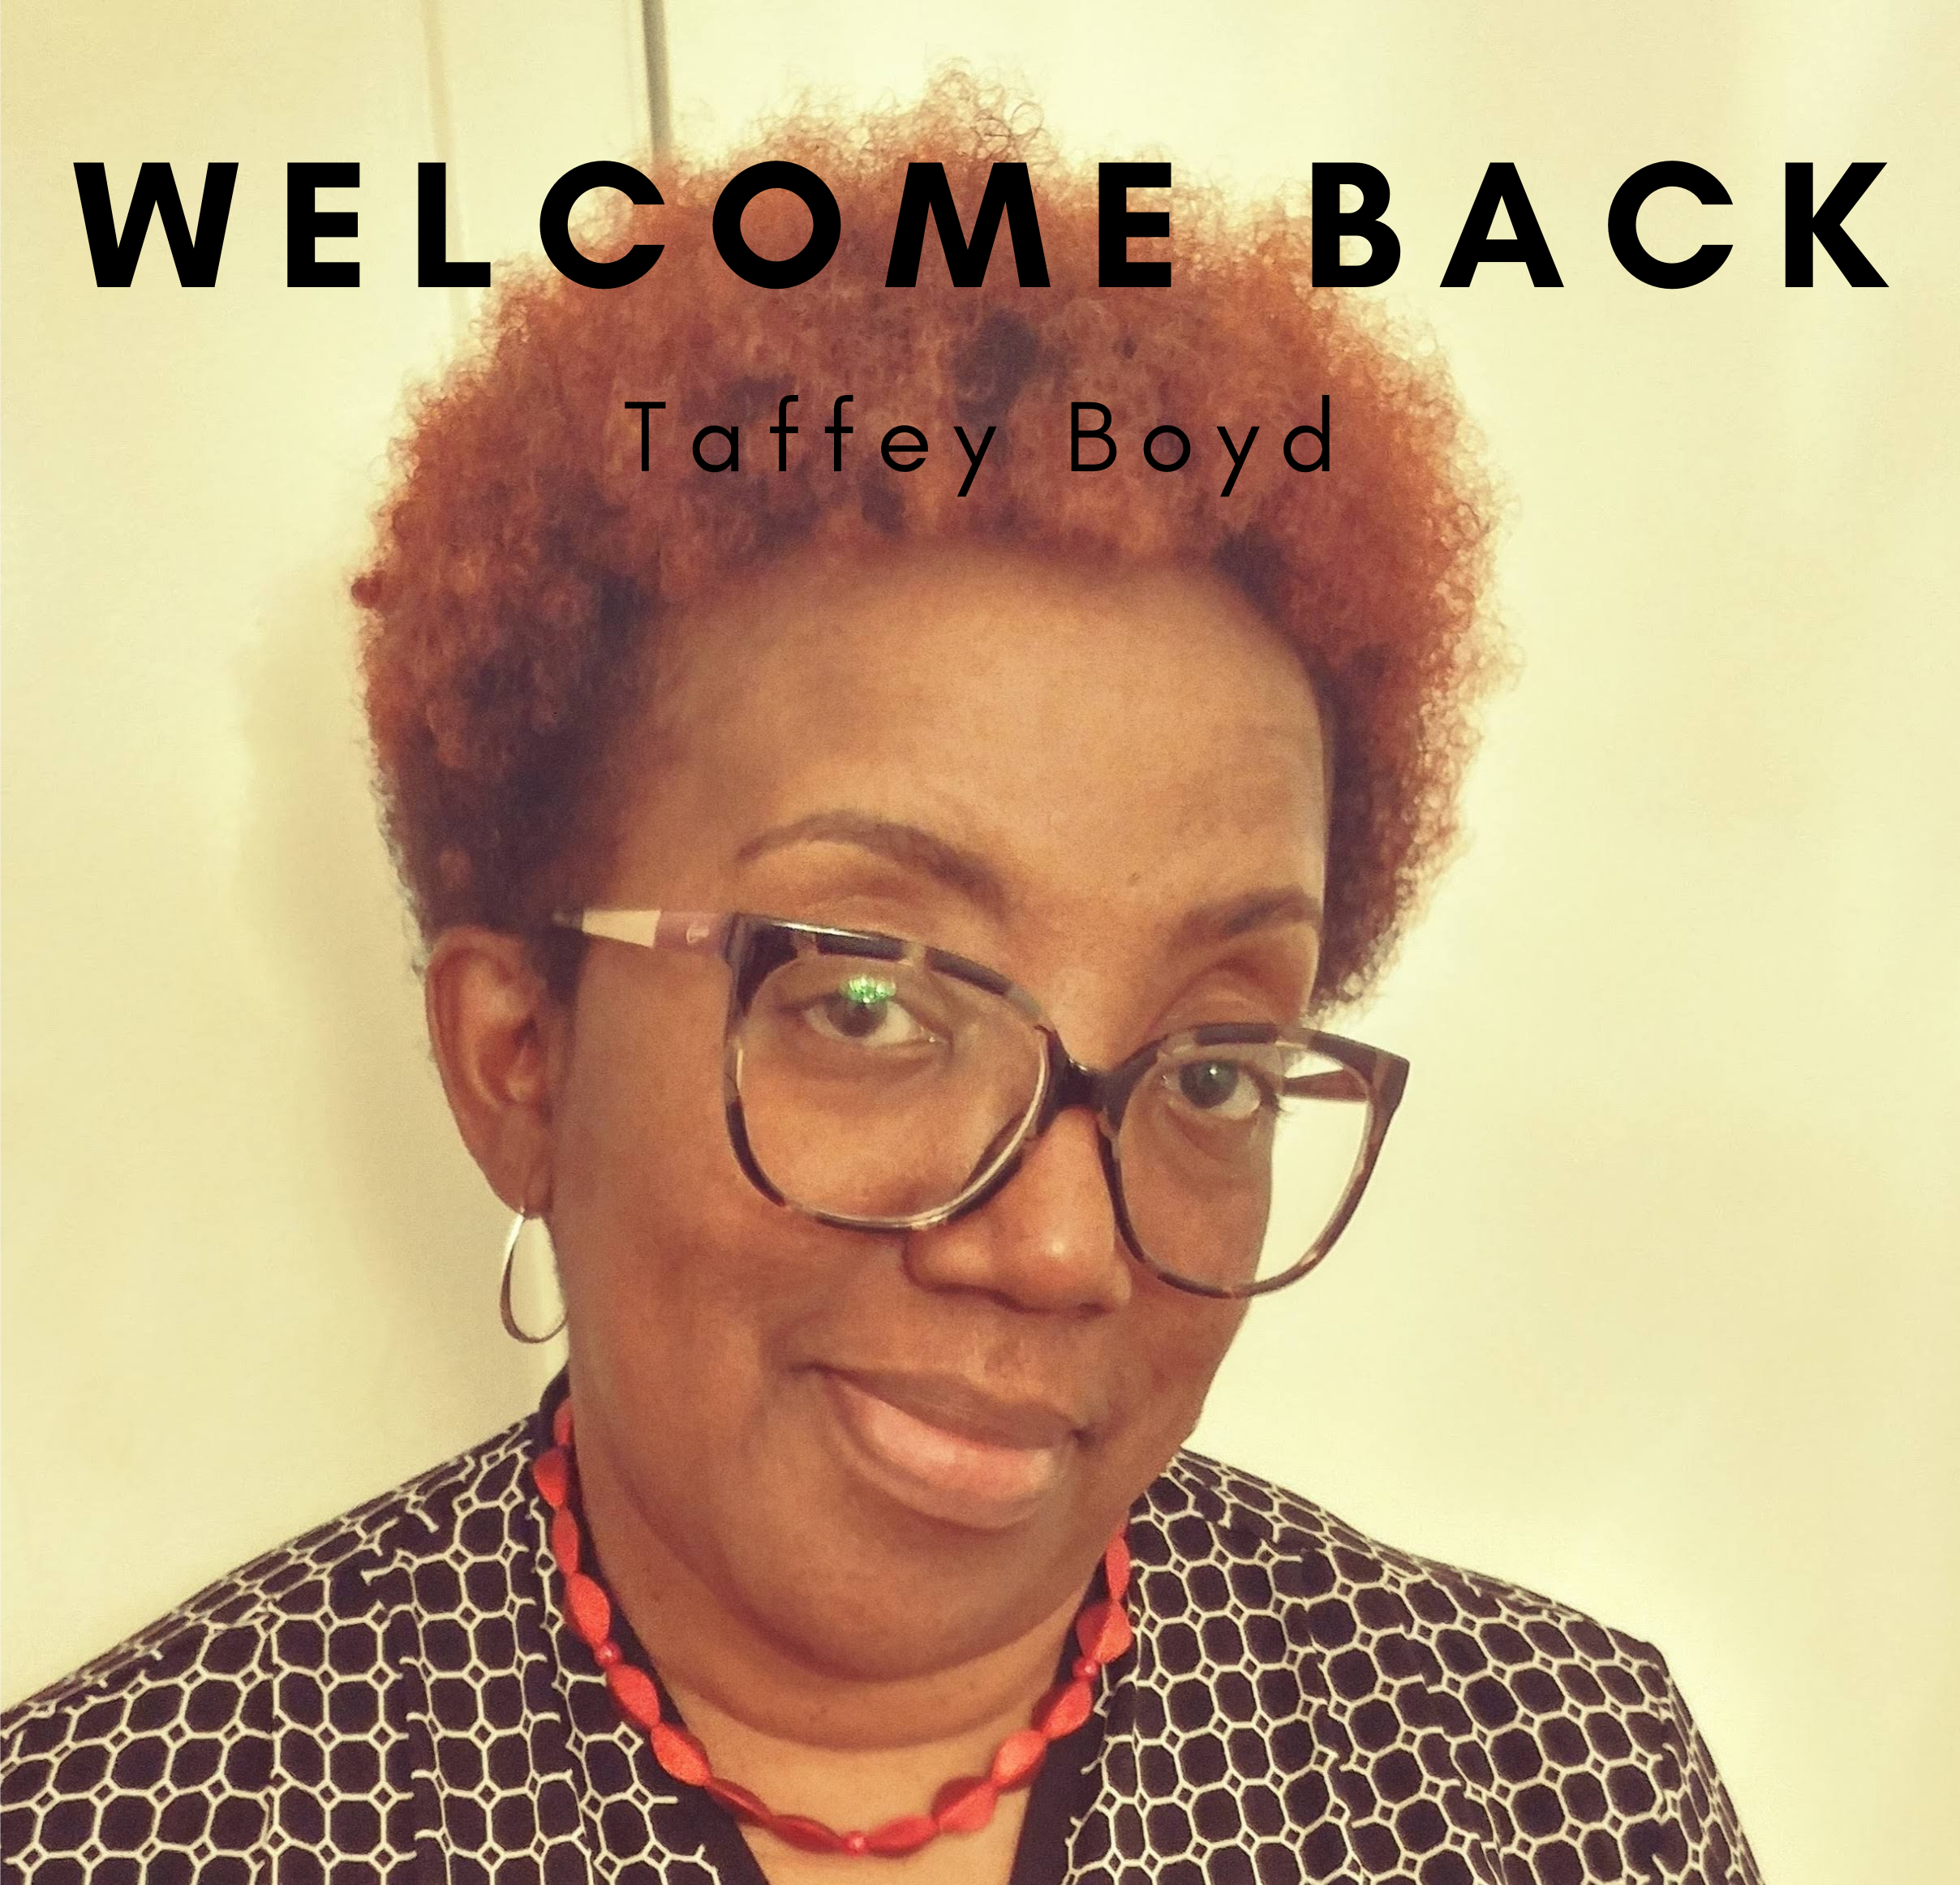 Dri Mark is Excited to Welcome Back Taffey Boyd!